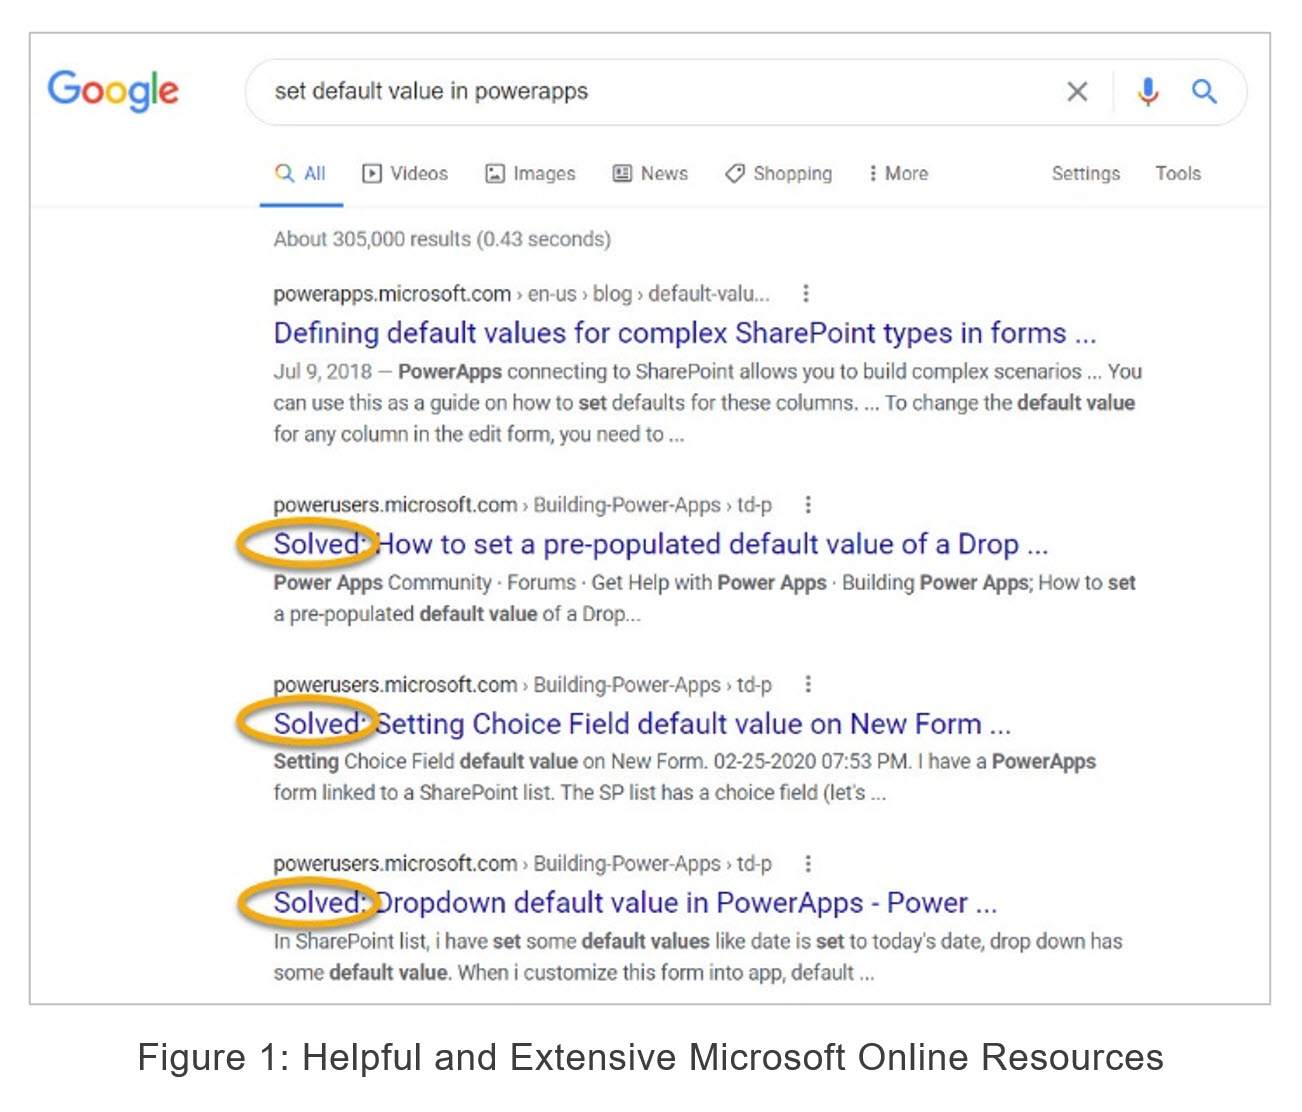 Extensive and Helpful Microsoft Resources